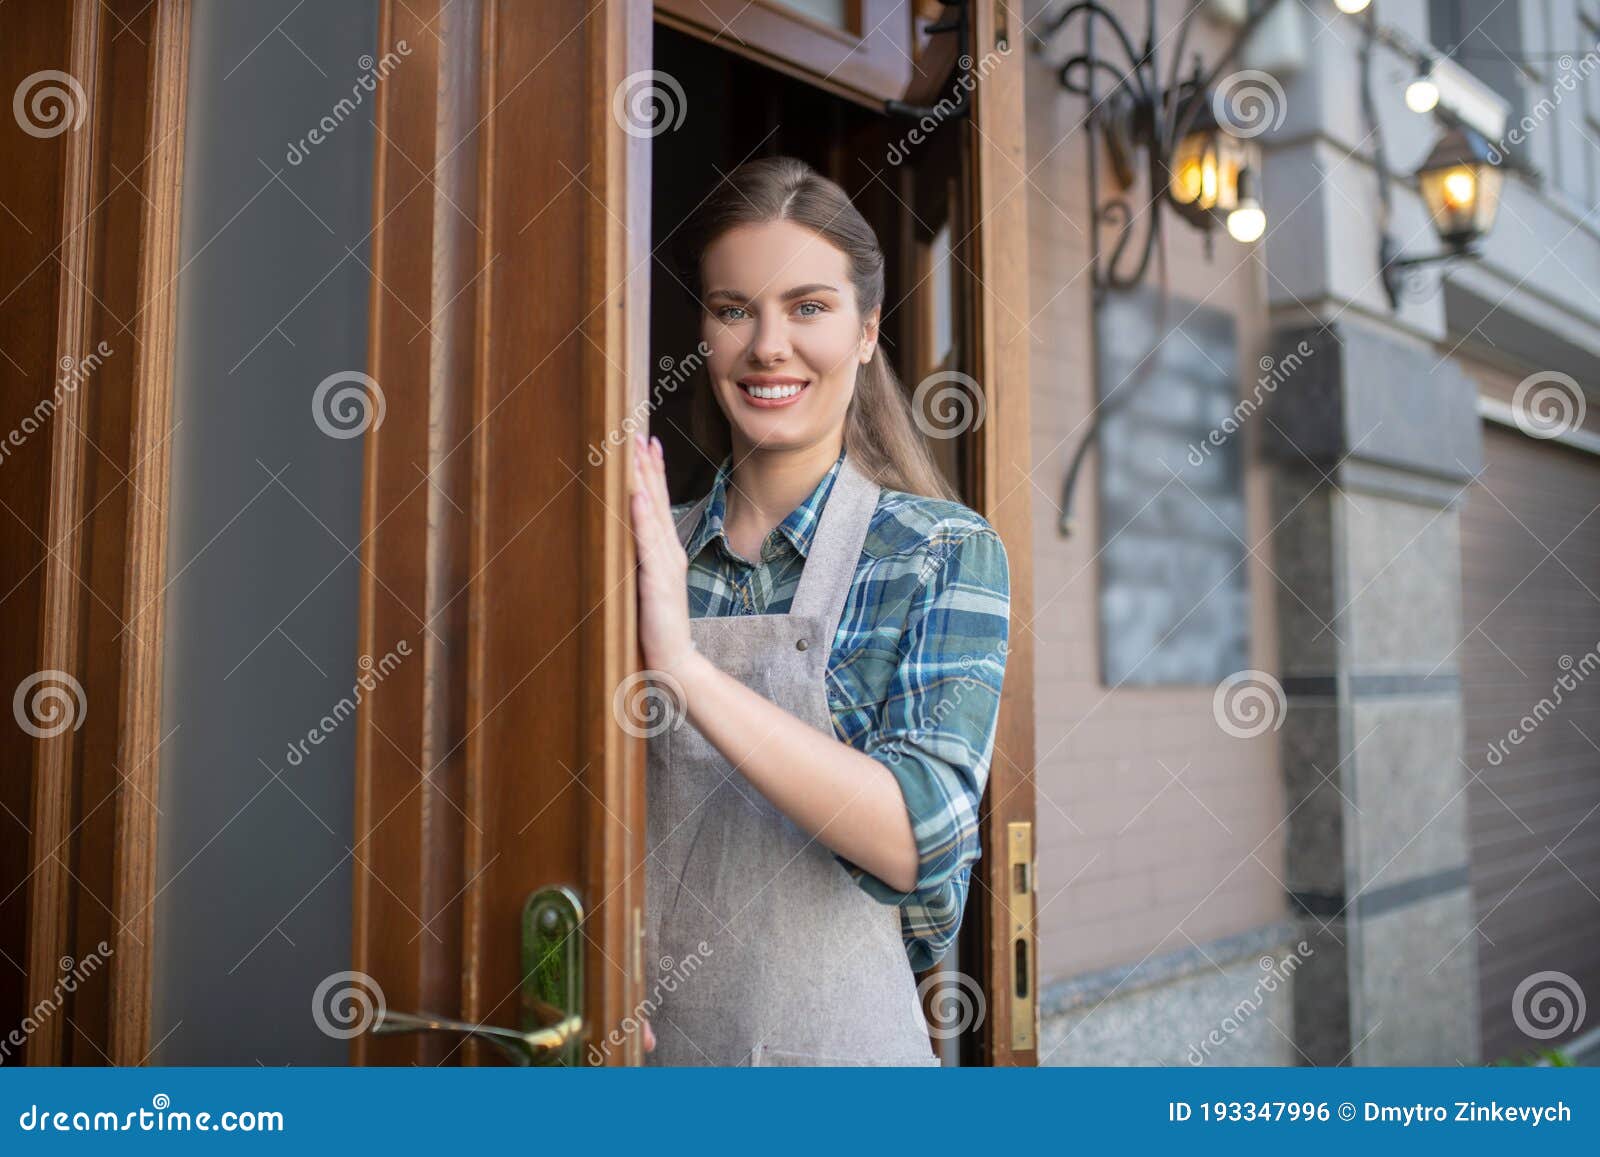 Cheerful Young Waitress in Grey Apron Opening Wooden Door Stock Photo ...